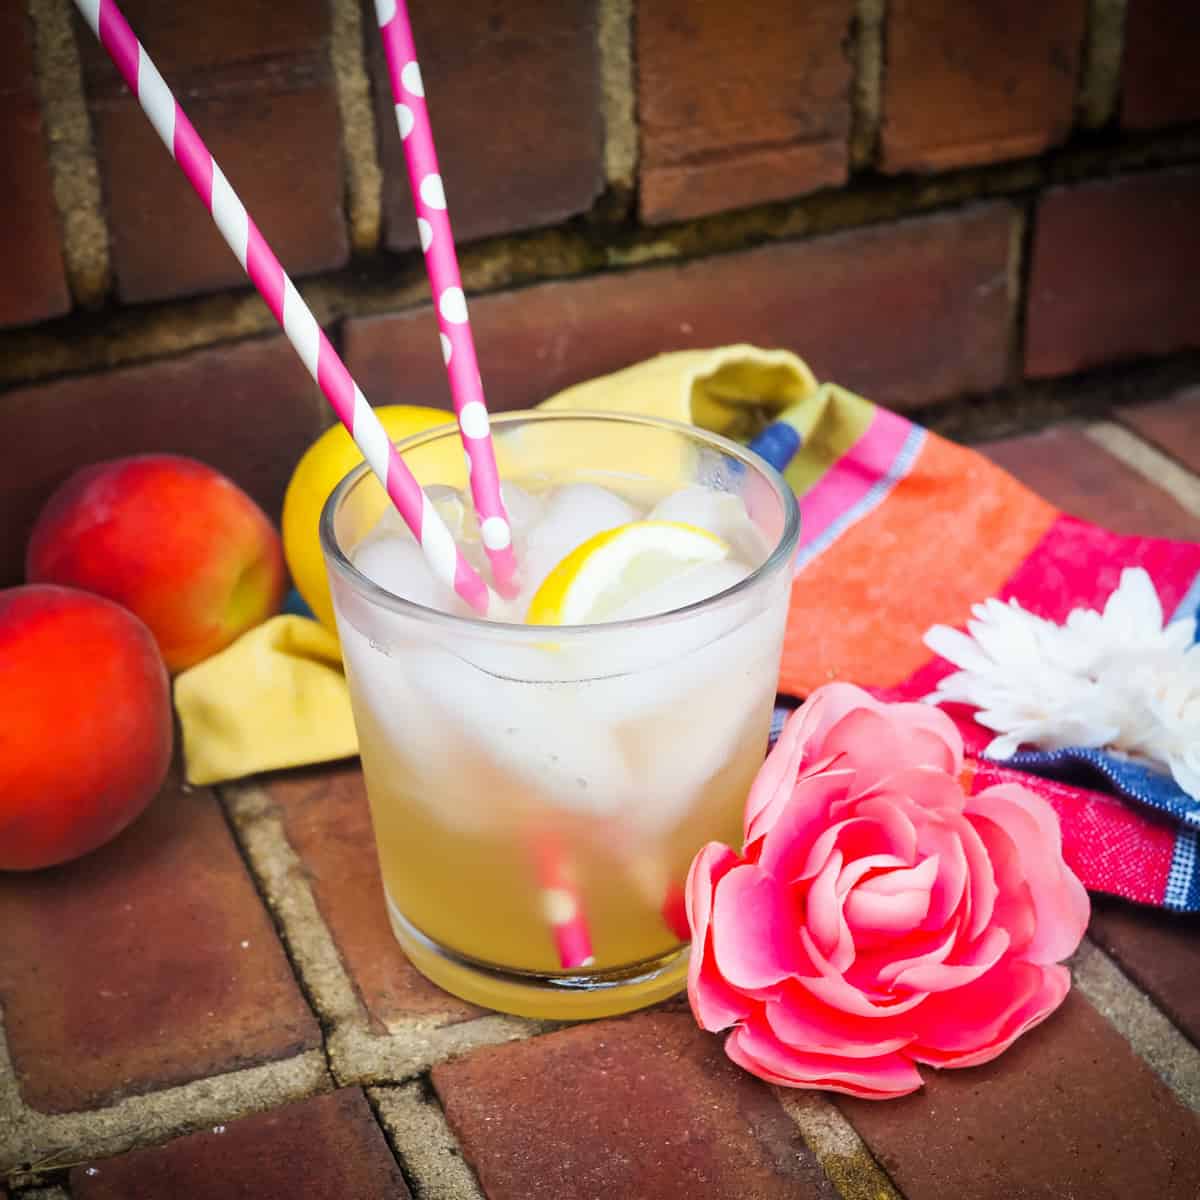 A glass of peach lemonade with two pink straws and a pink flower on a brick step.